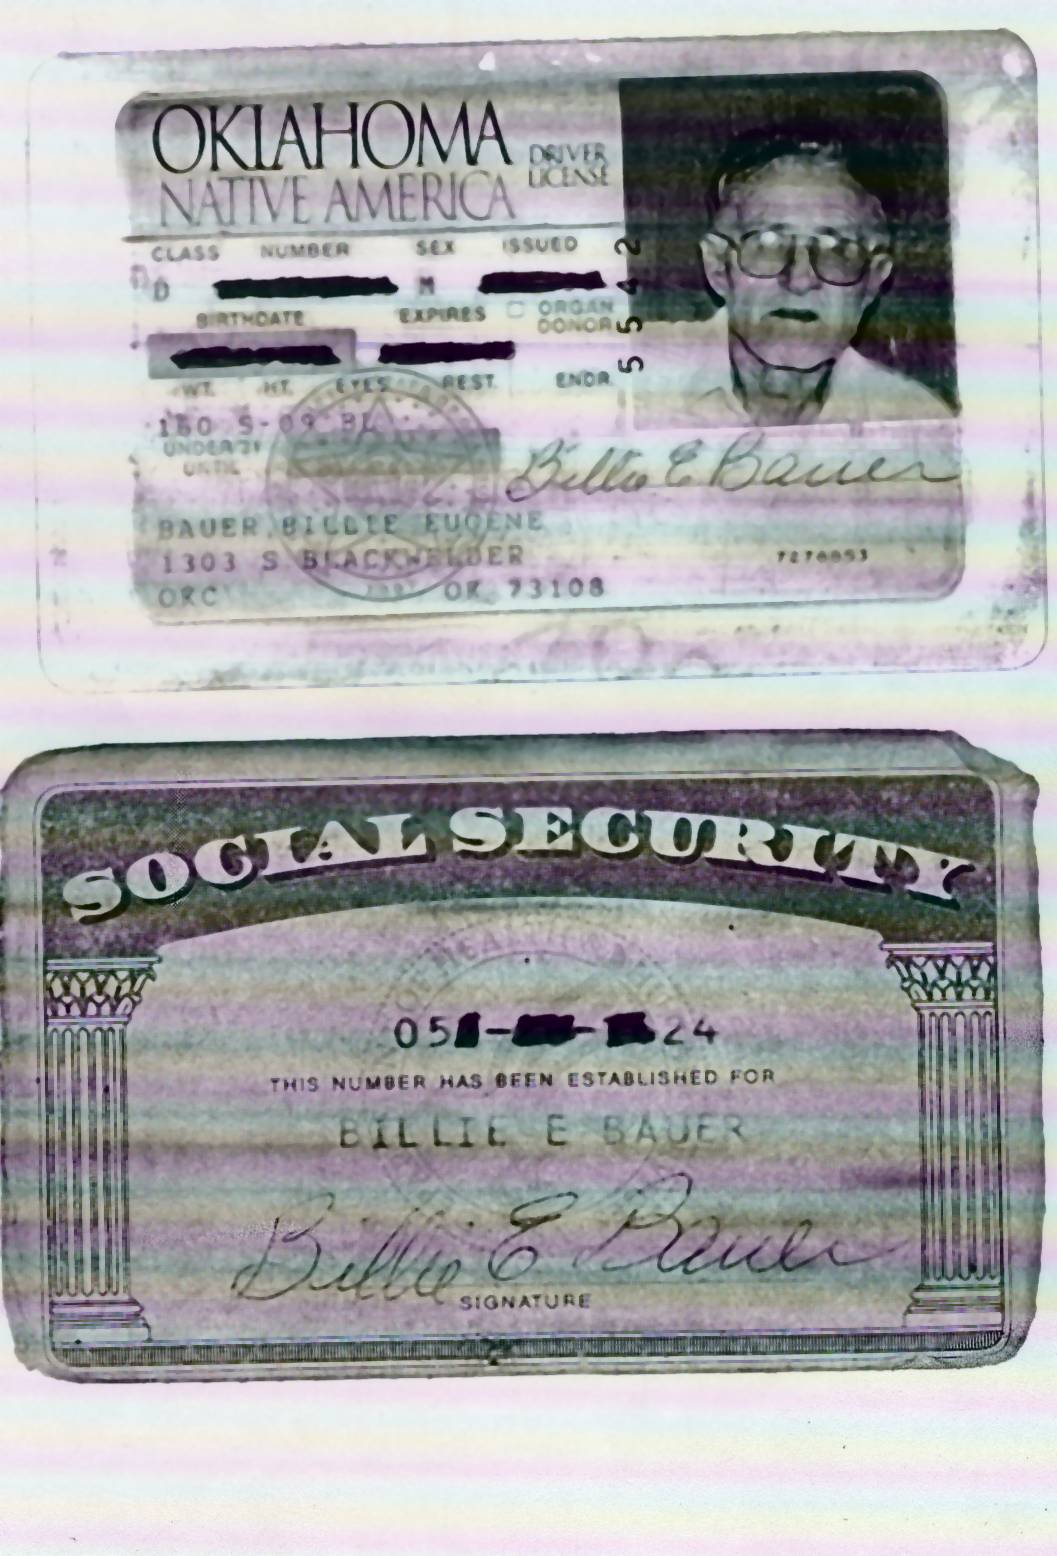 Two forms of ID